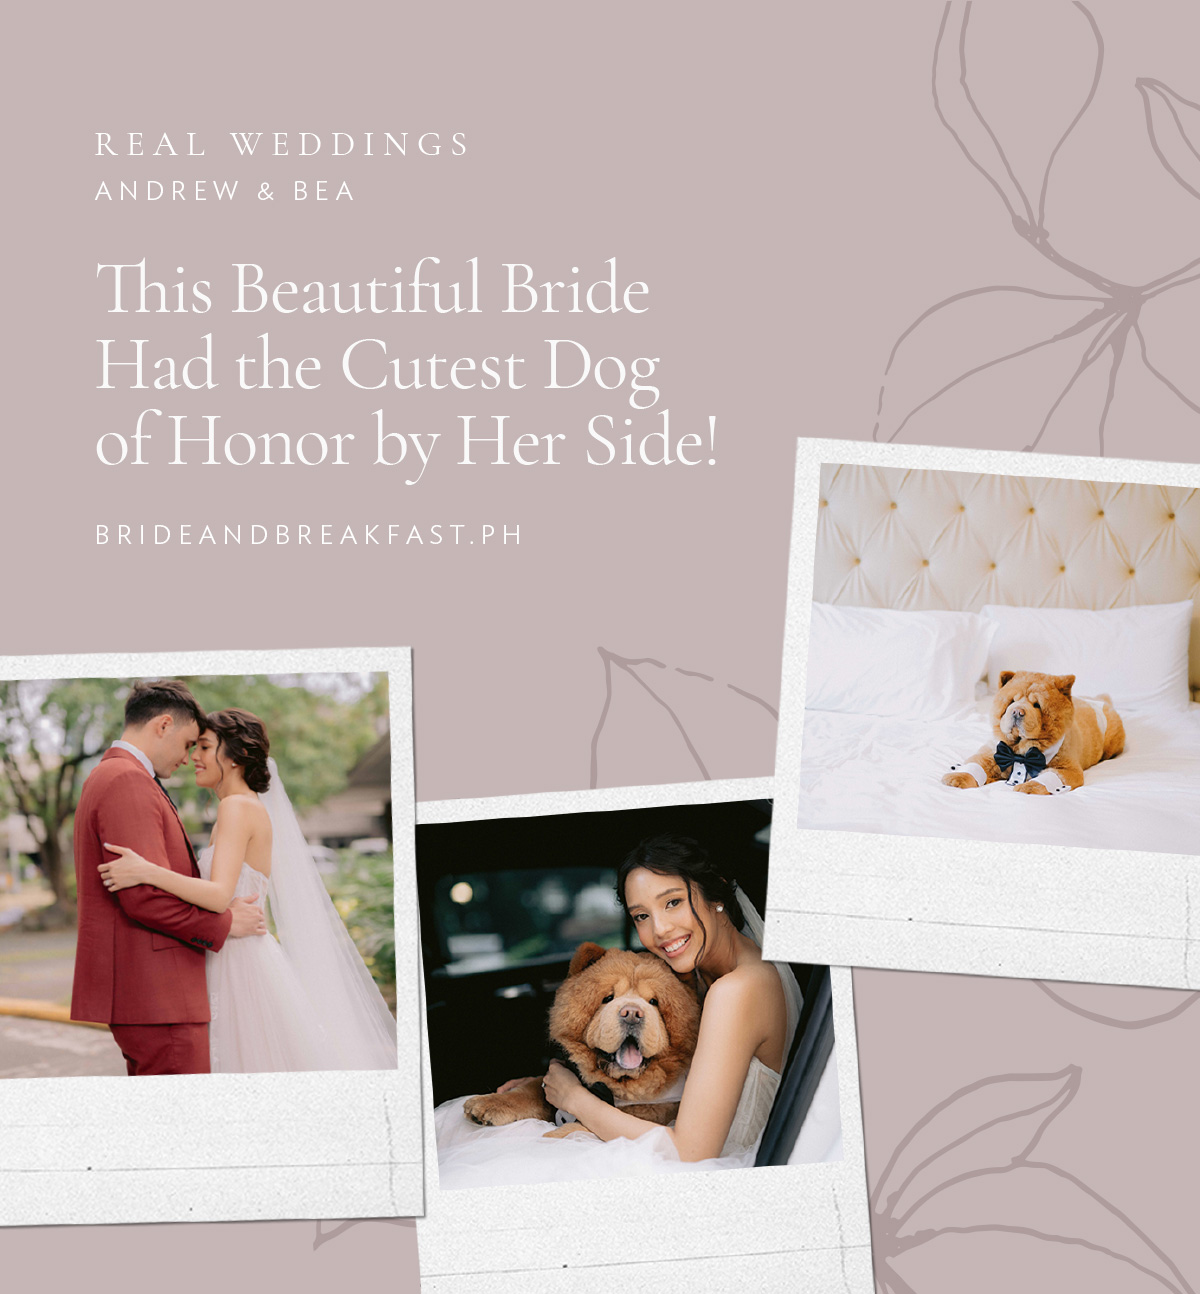 This Beautiful Bride Had the Cutest Dog of Honor by Her Side!